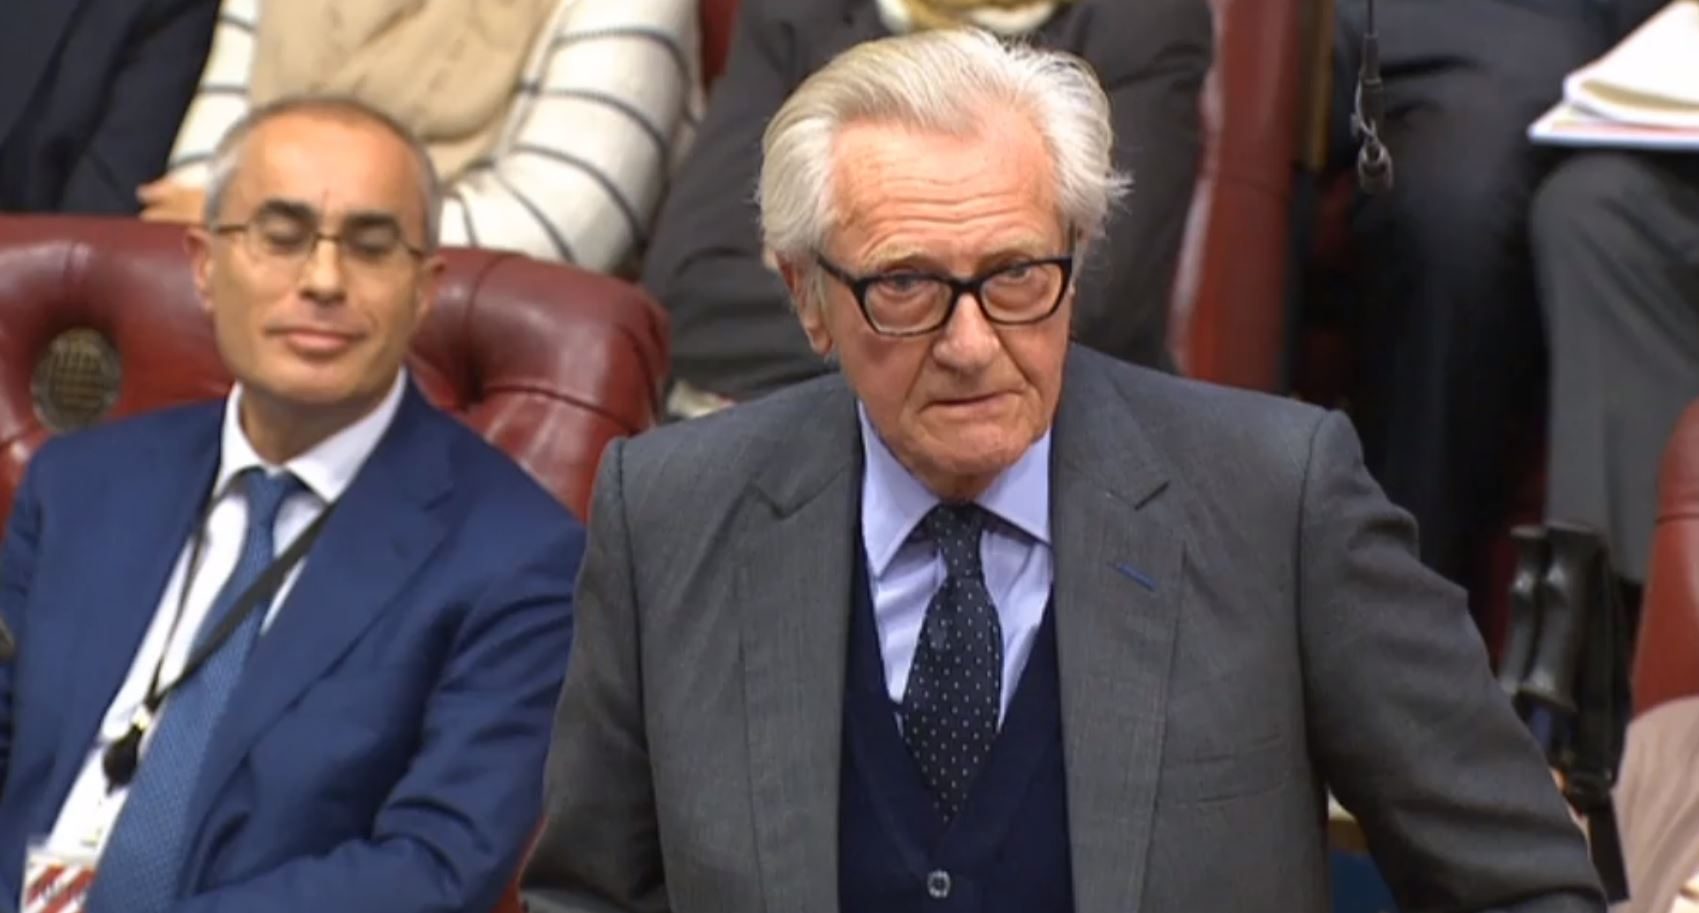 Lord Heseltine speaks in the House of Lord, as they debate the Brexit Bill.